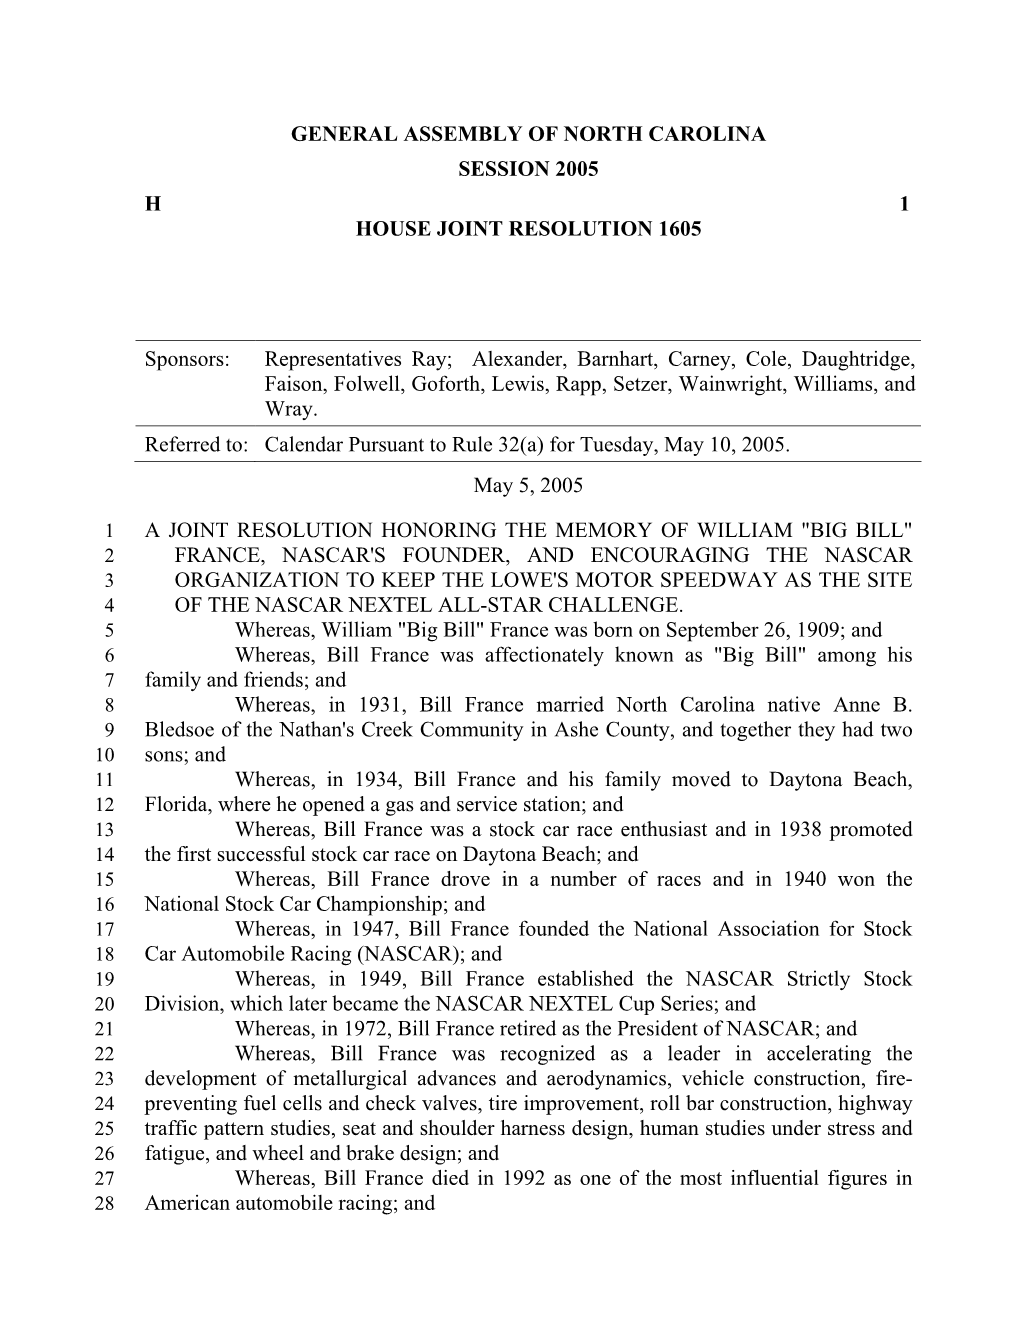 General Assembly of North Carolina Session 2005 H 1 House Joint Resolution 1605